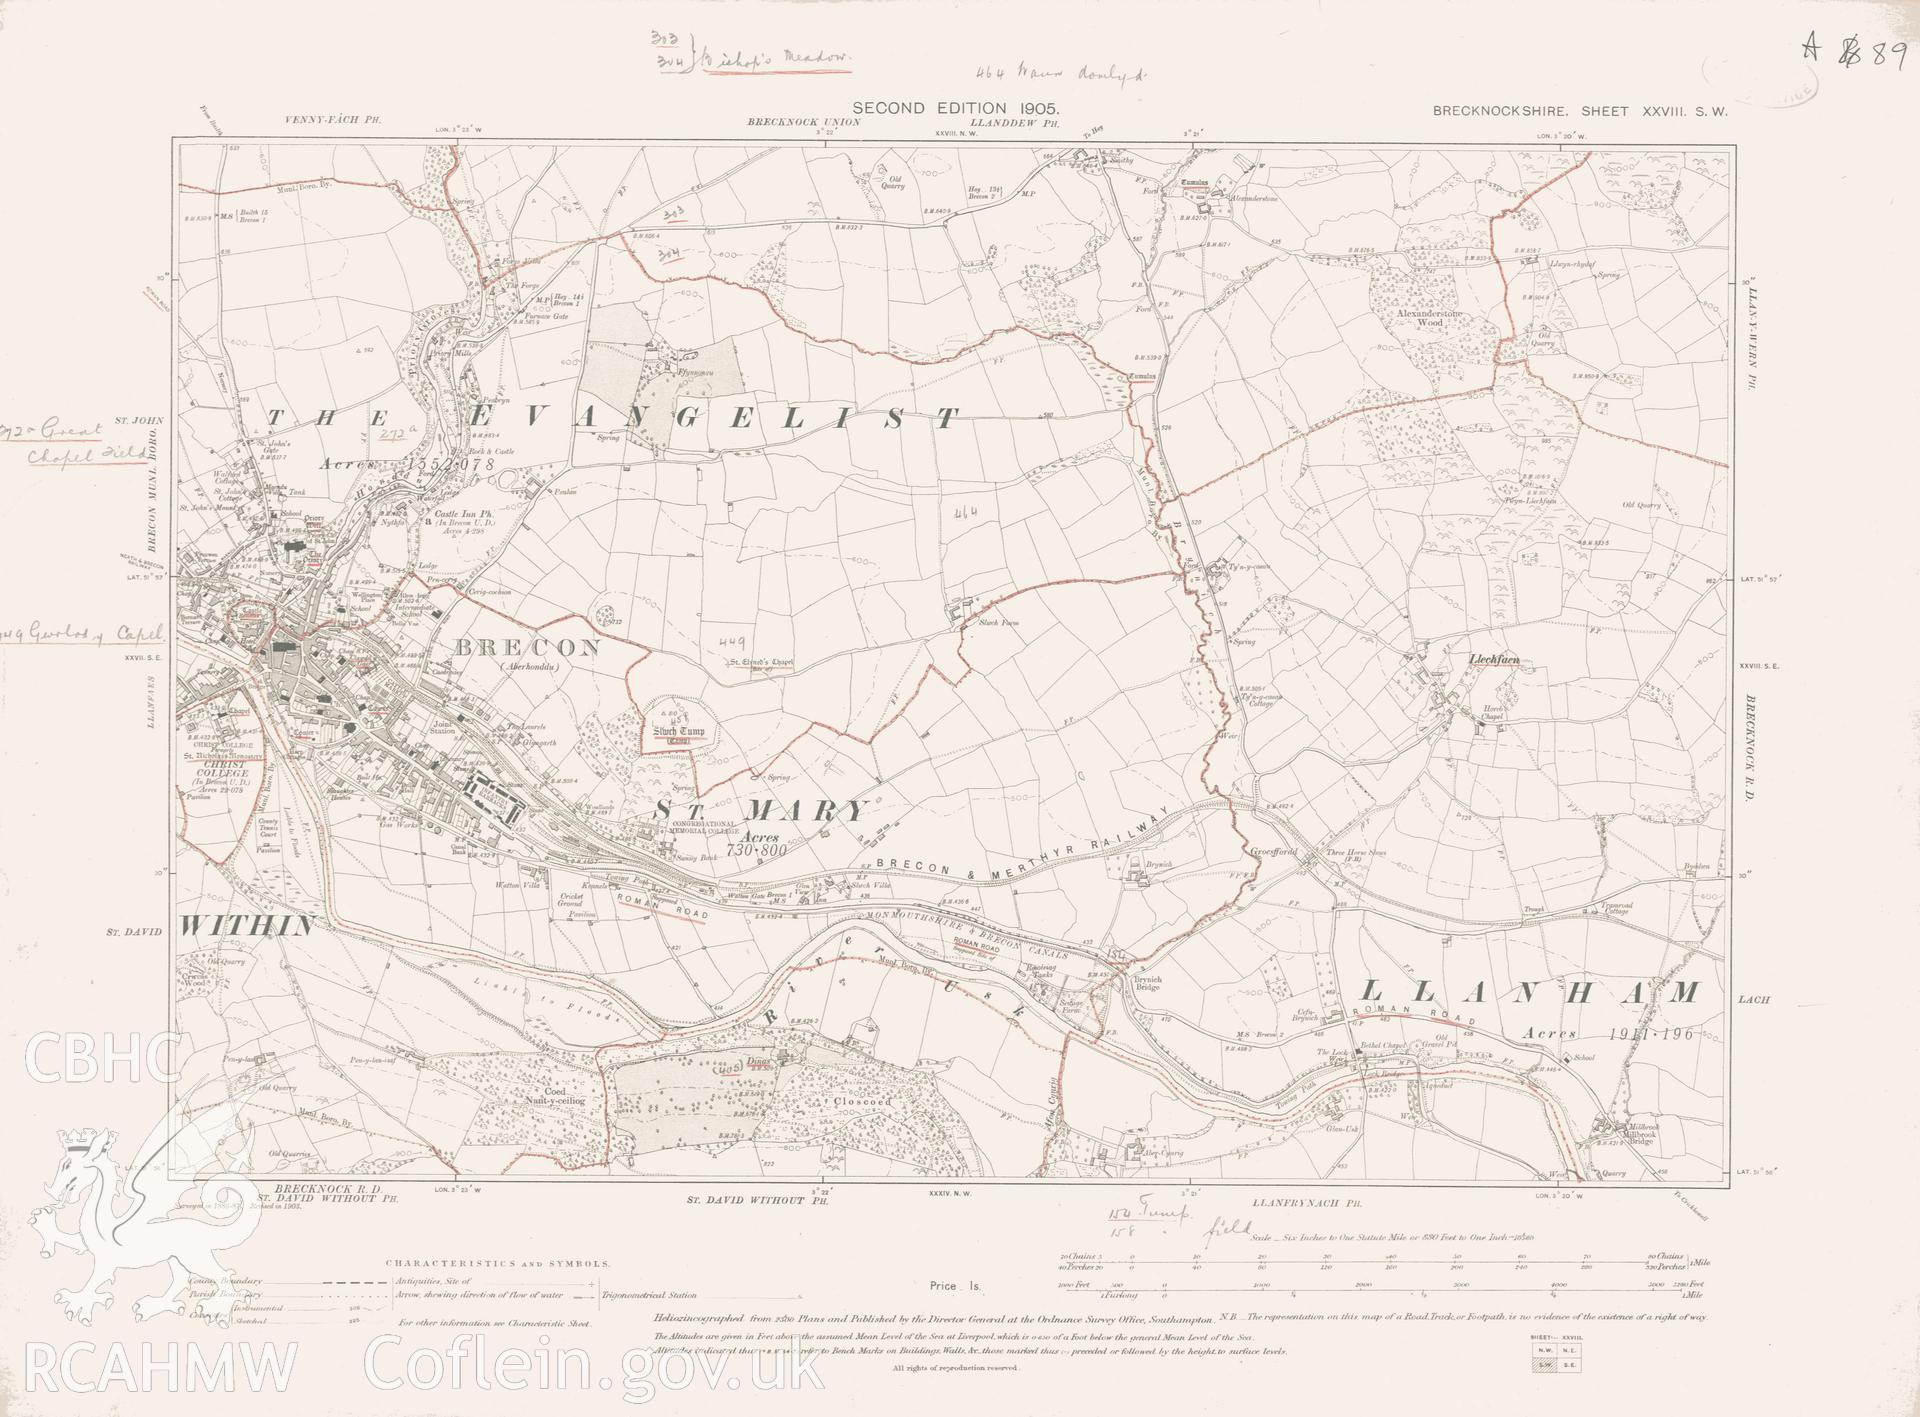 Digital copy of a Second Edition 1905 Ordnance Survey map covering Brecon Town.